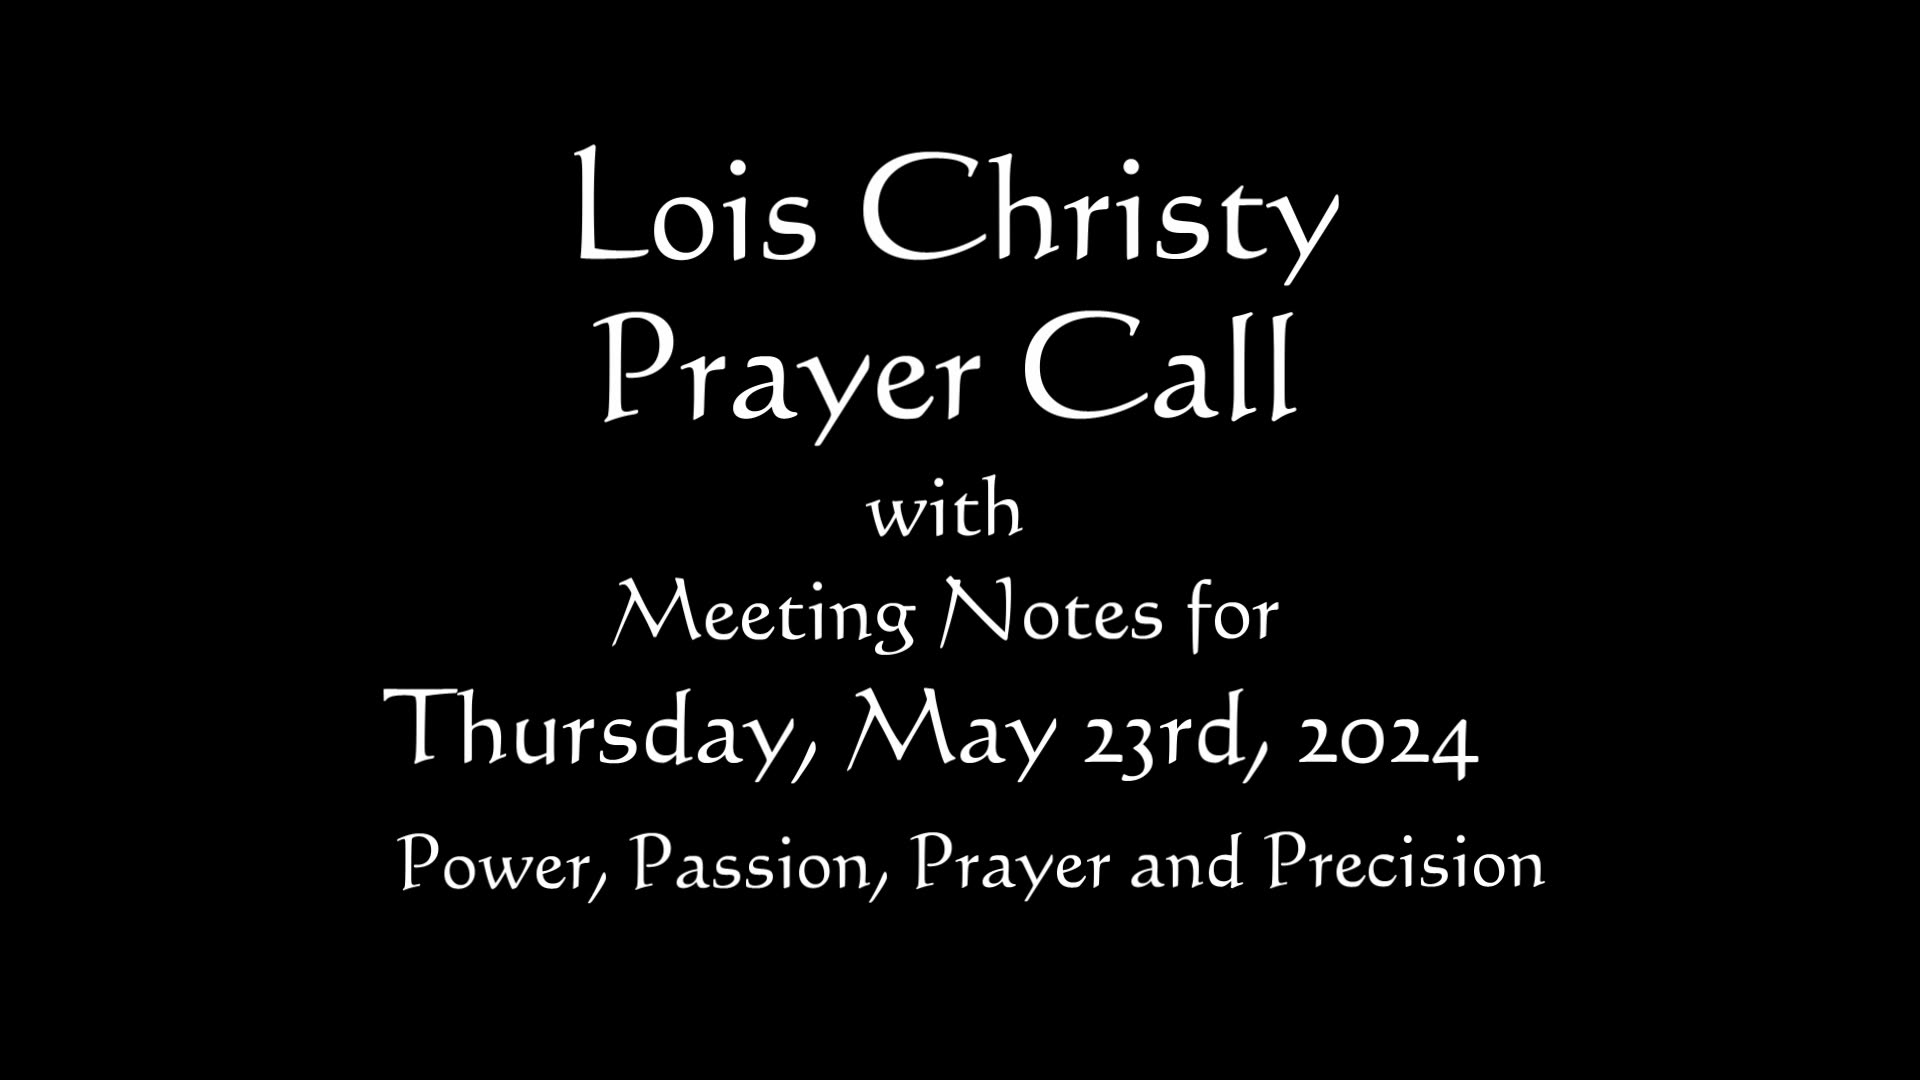 Lois Christy Prayer Group conference call for Thursday, May 23rd, 2024